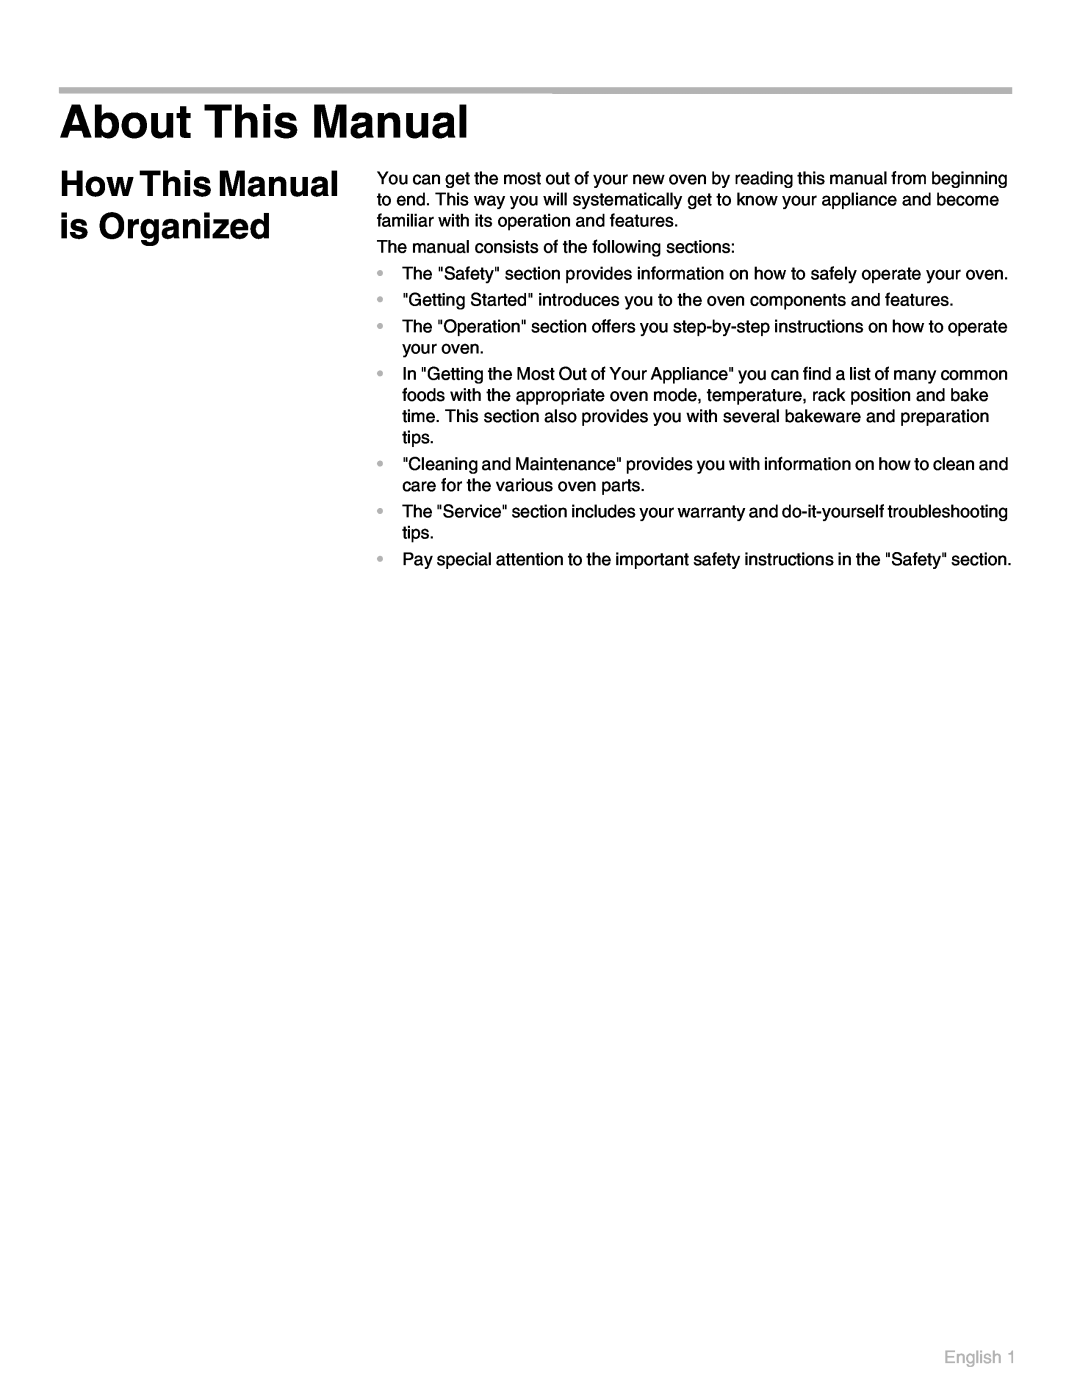 Thermador POD 302 manual About This Manual, How This Manual is Organized, English 